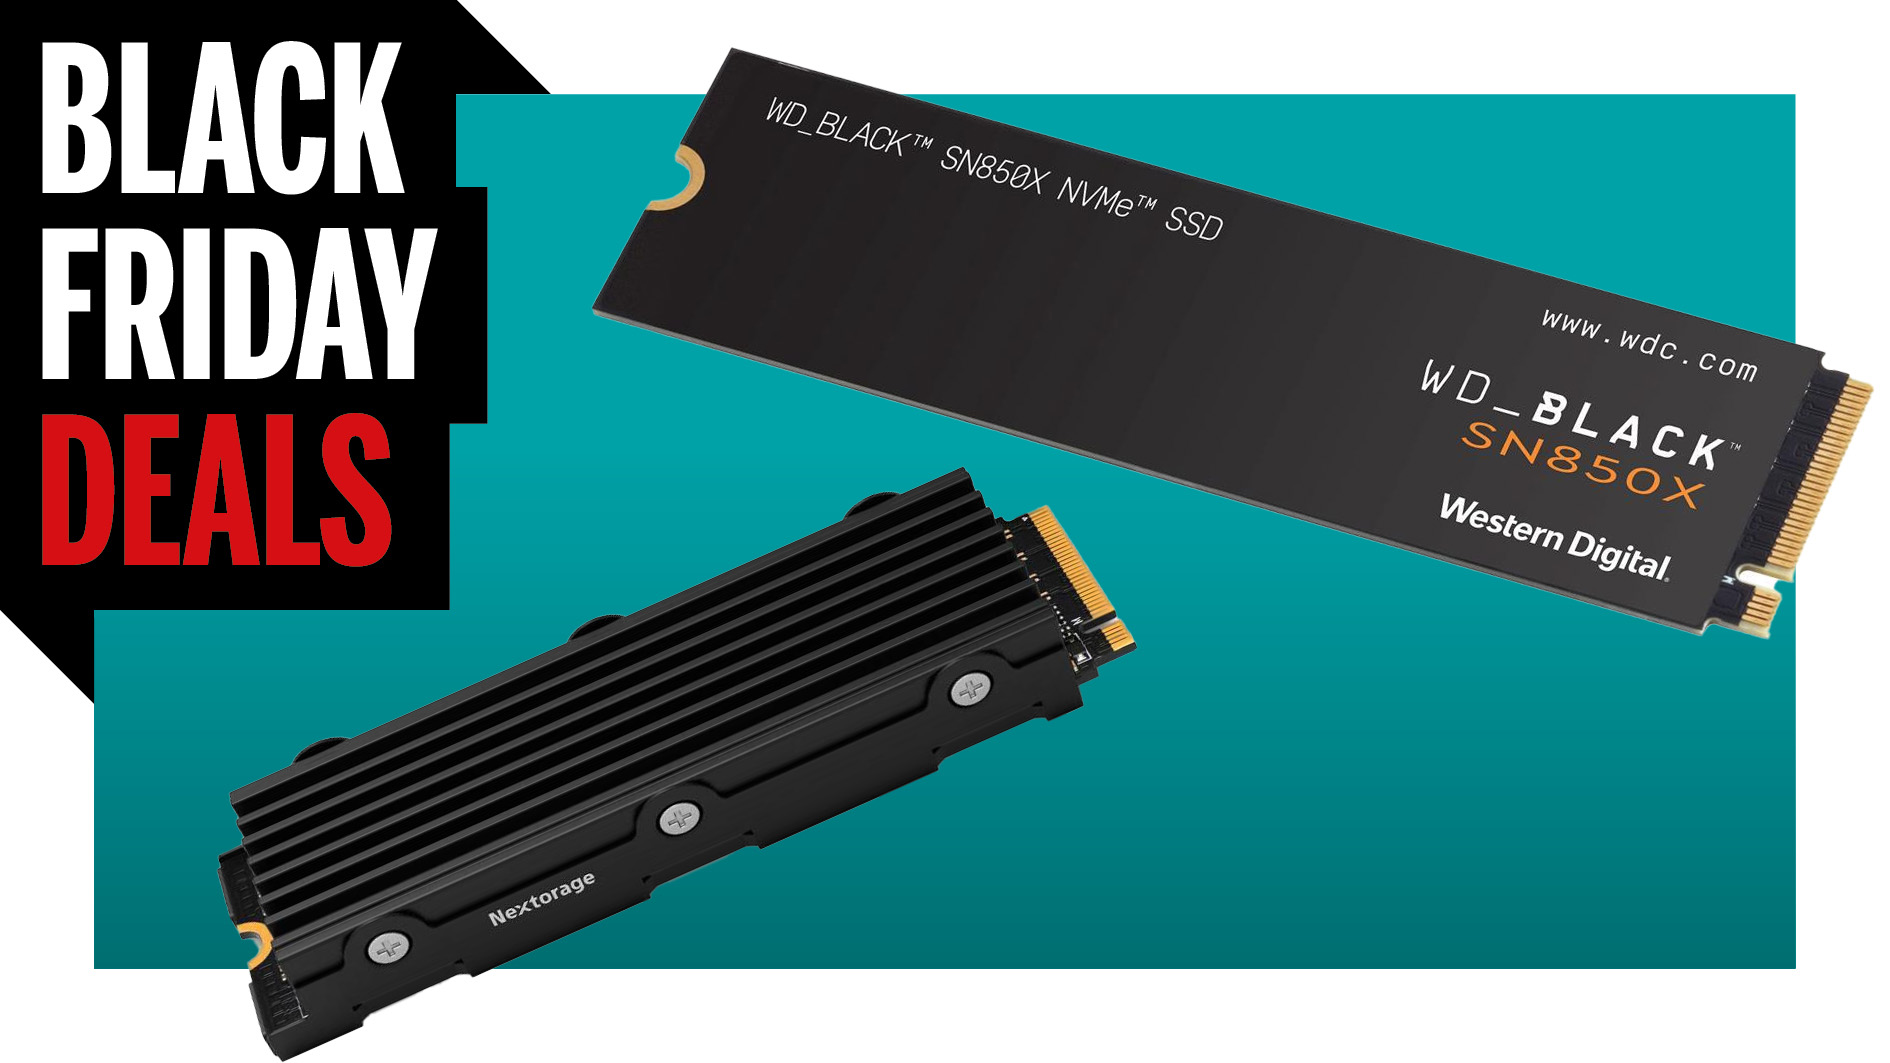 Upgrade your Steam Deck SSD storage to 1TB with this $46 Solidigm P41 2230  NVMe SSD